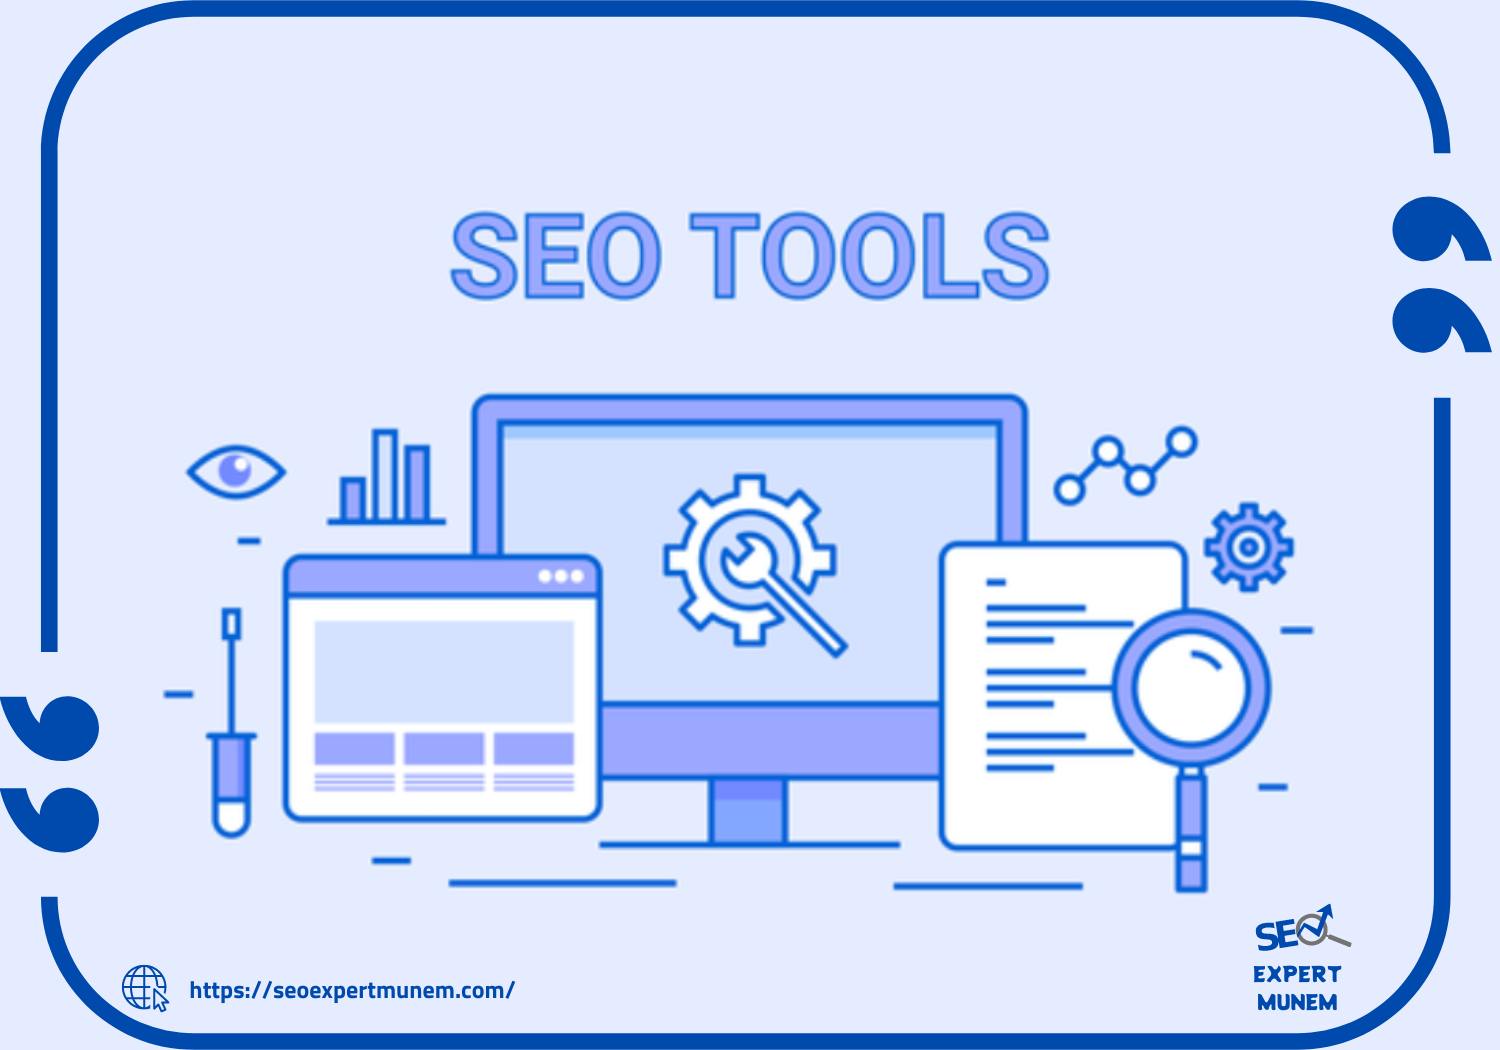 What is an SEO Tool?